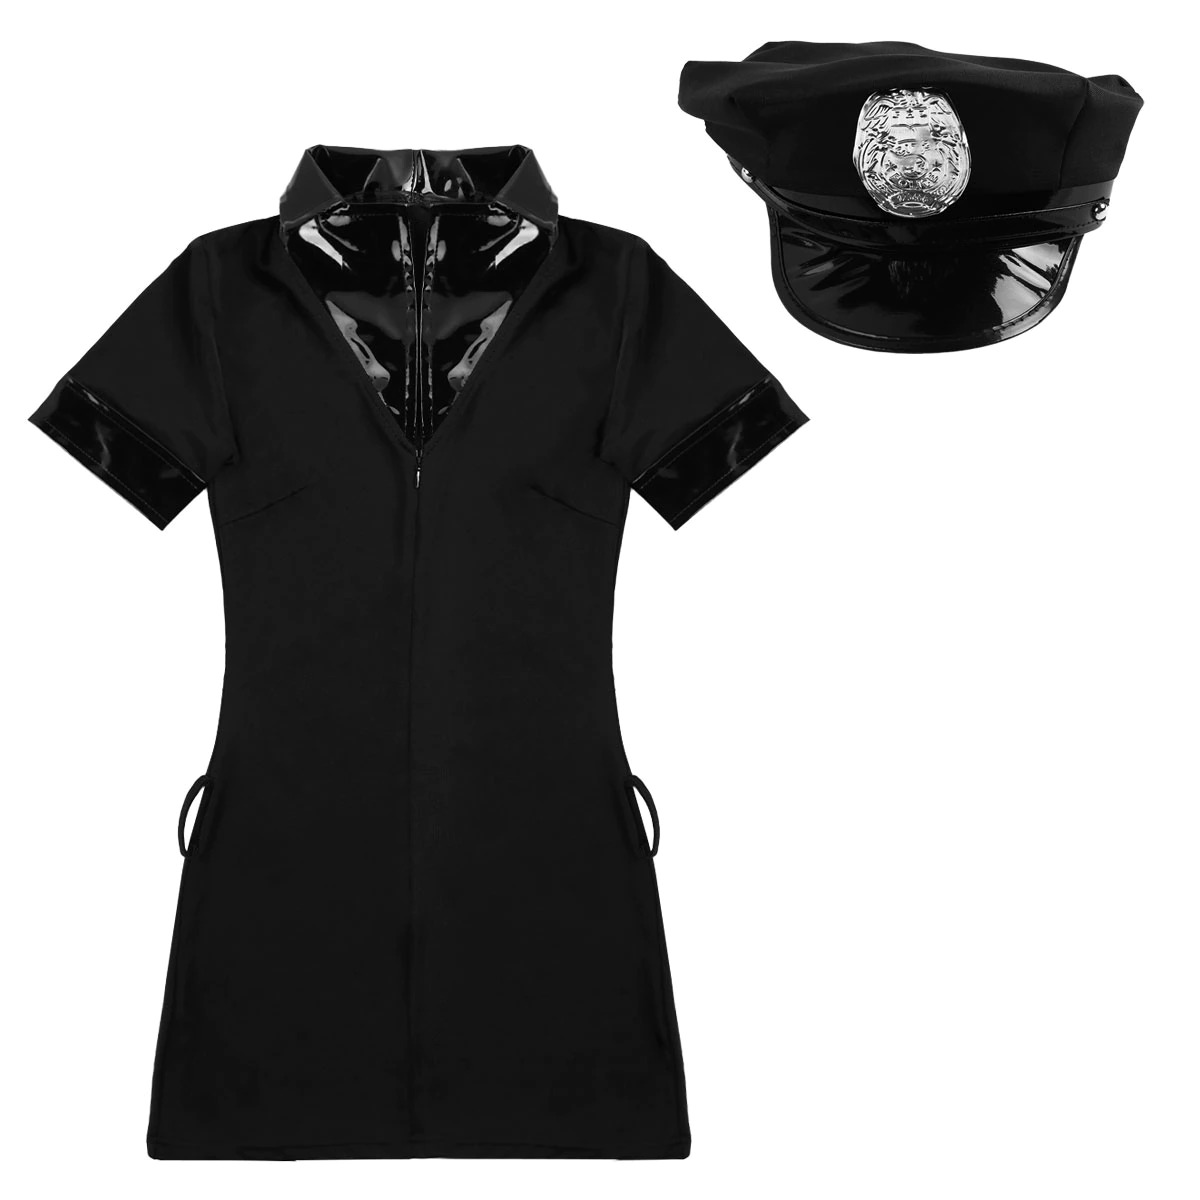 Bodycon Mini Dress Police Officer Cosplay Women Costume / Halloween Costume With Hat And Cuffs - EVE's SECRETS